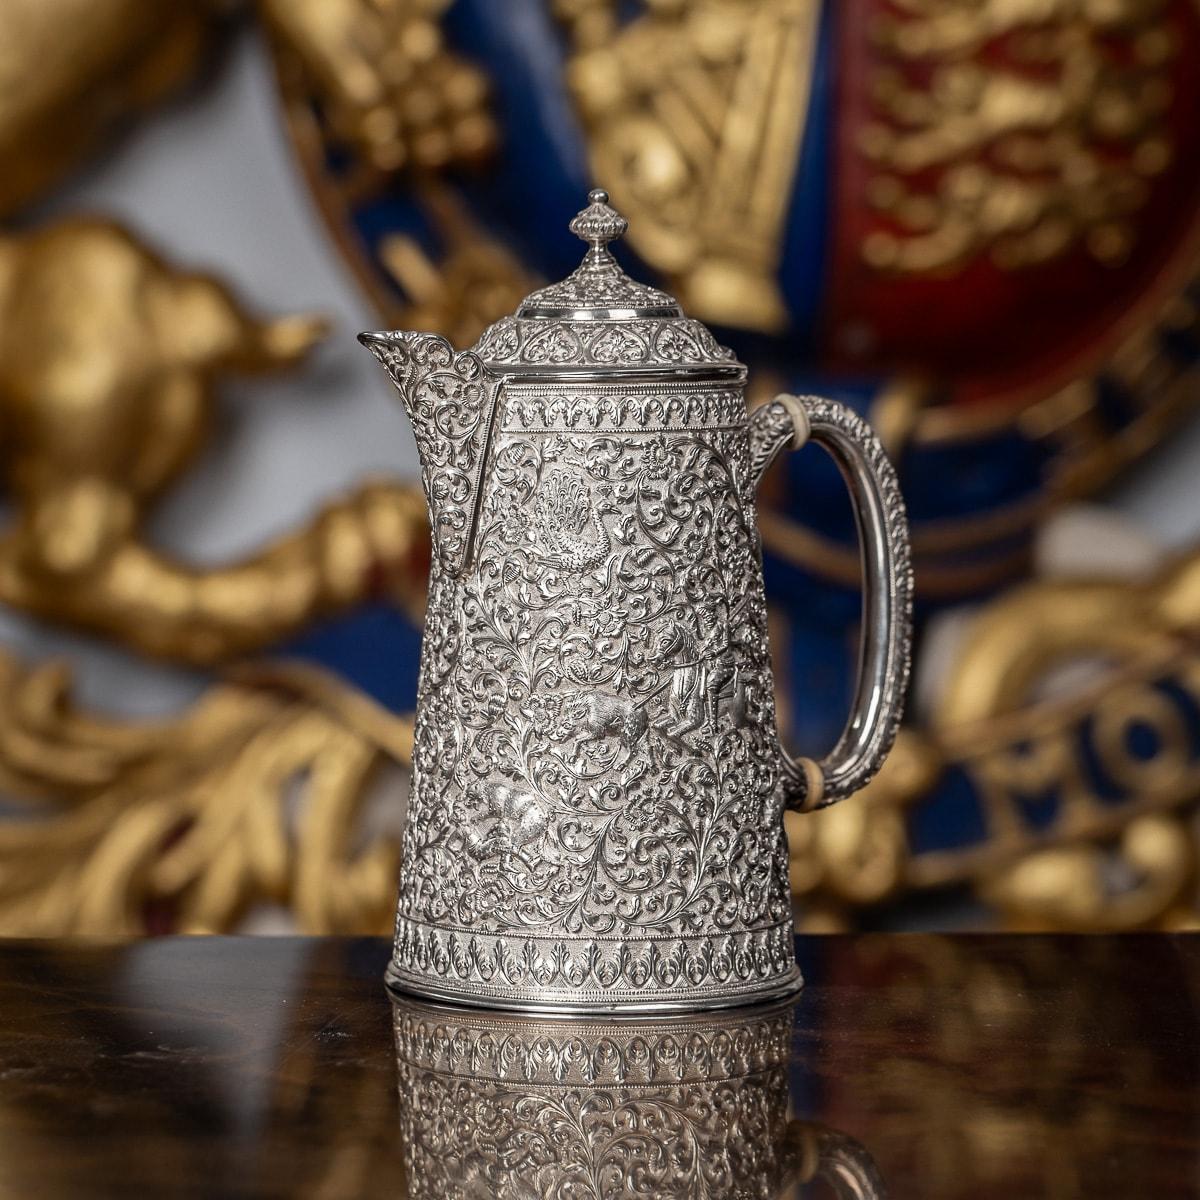 Antique 19th Century Indian Colonial solid silver ewer, straight body resting on a circular base, c-shape handle and hinged lid surmounted by a knob and ball finial. The piece is profusely and intricatly chased with scrolling leaves, flowers and